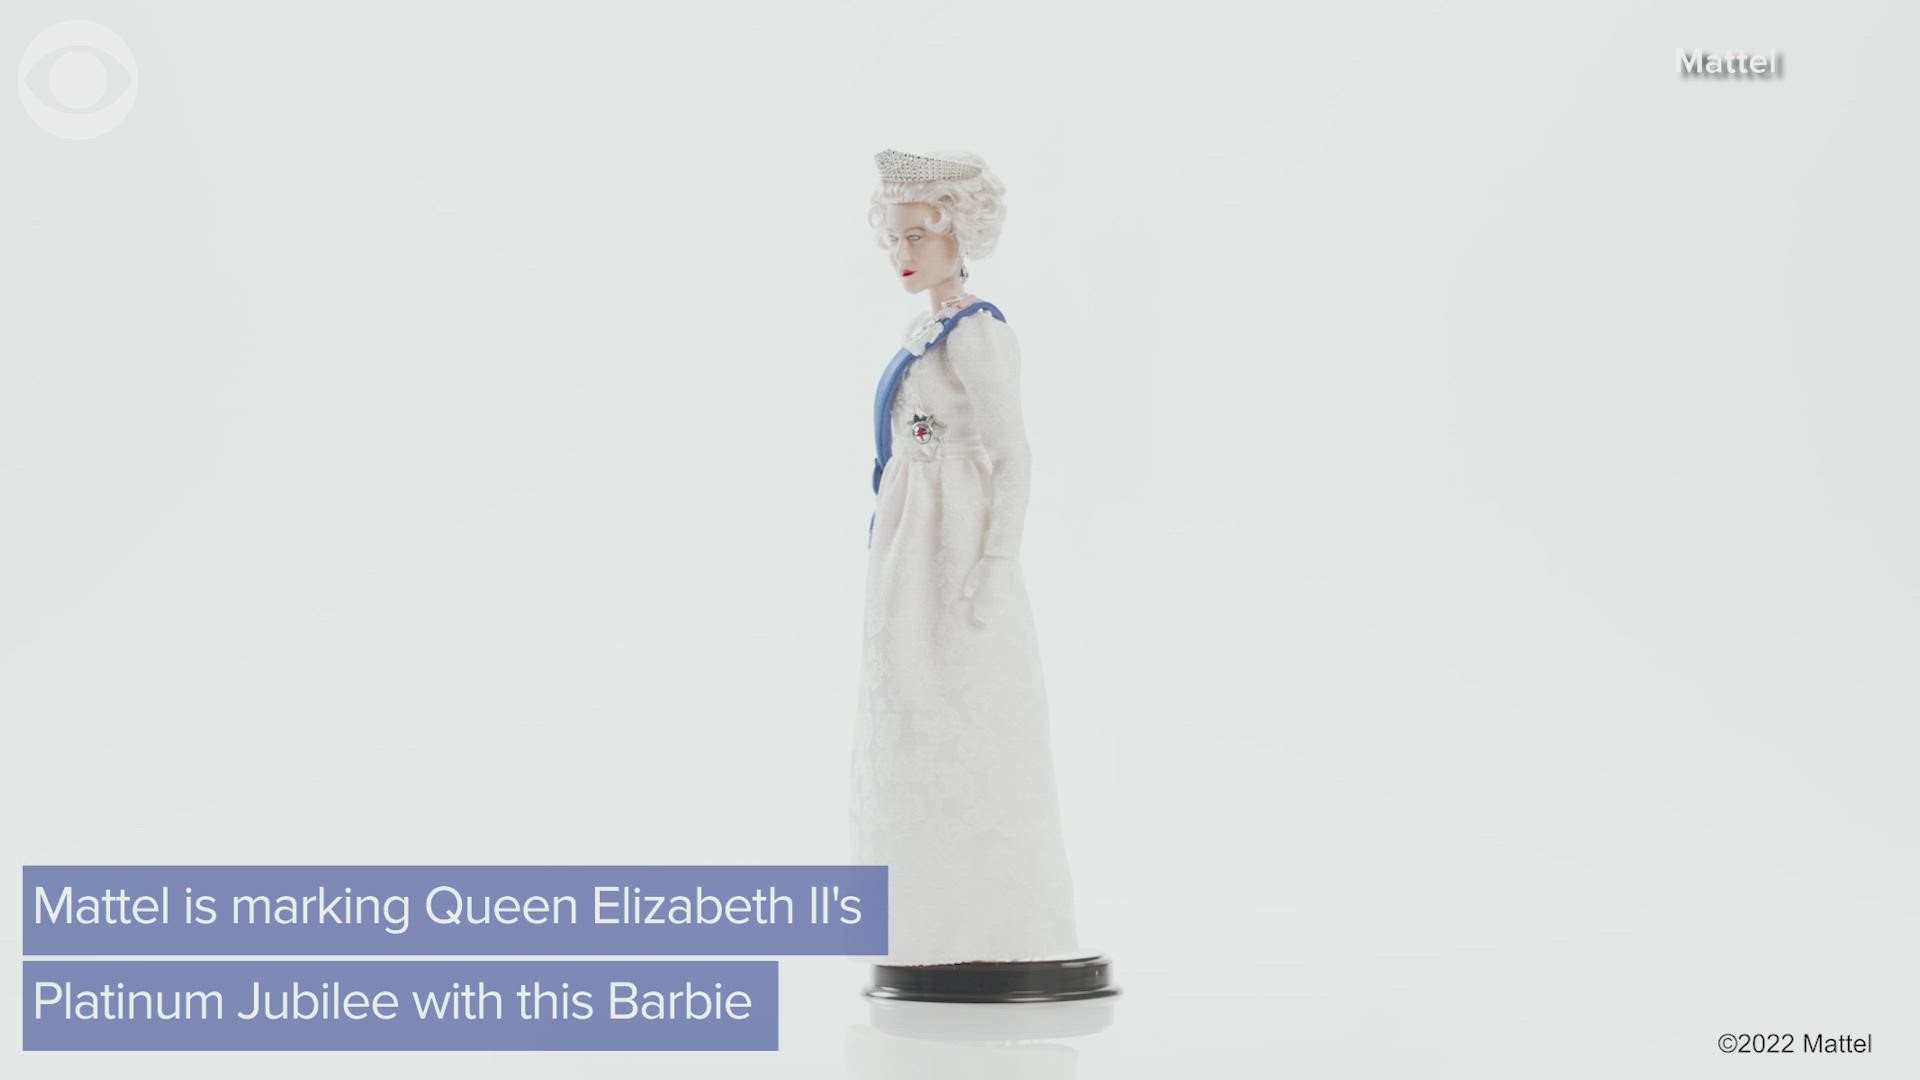 Britain's Queen Elizabeth II is hitting several milestones this year, including her 96th birthday and 70 years on the throne, and now there is a Barbie to honor her.